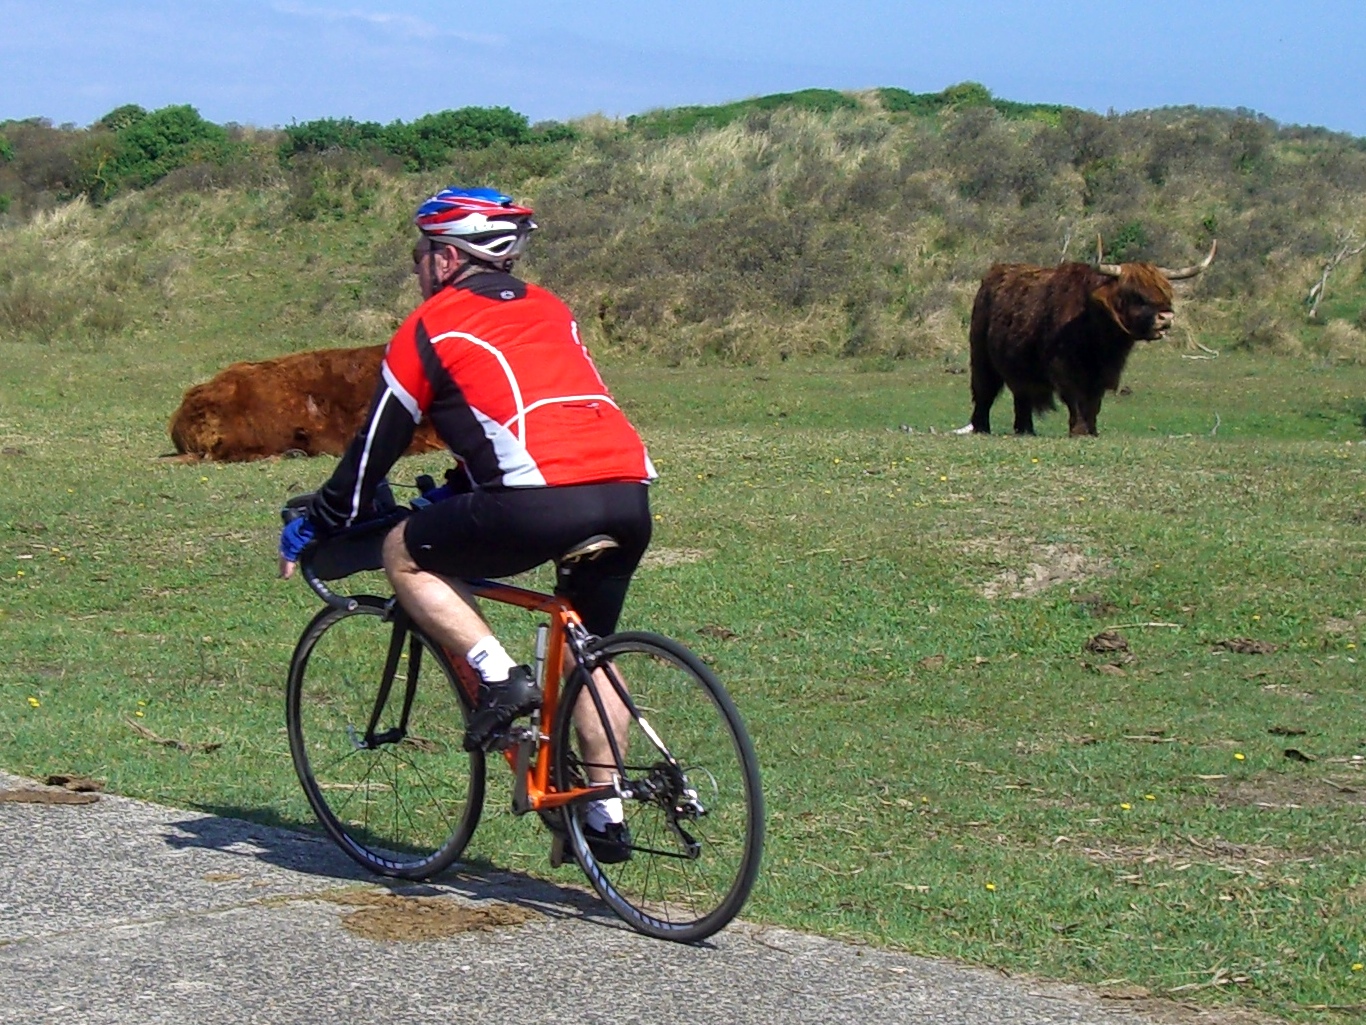 Bisons at the cycle track